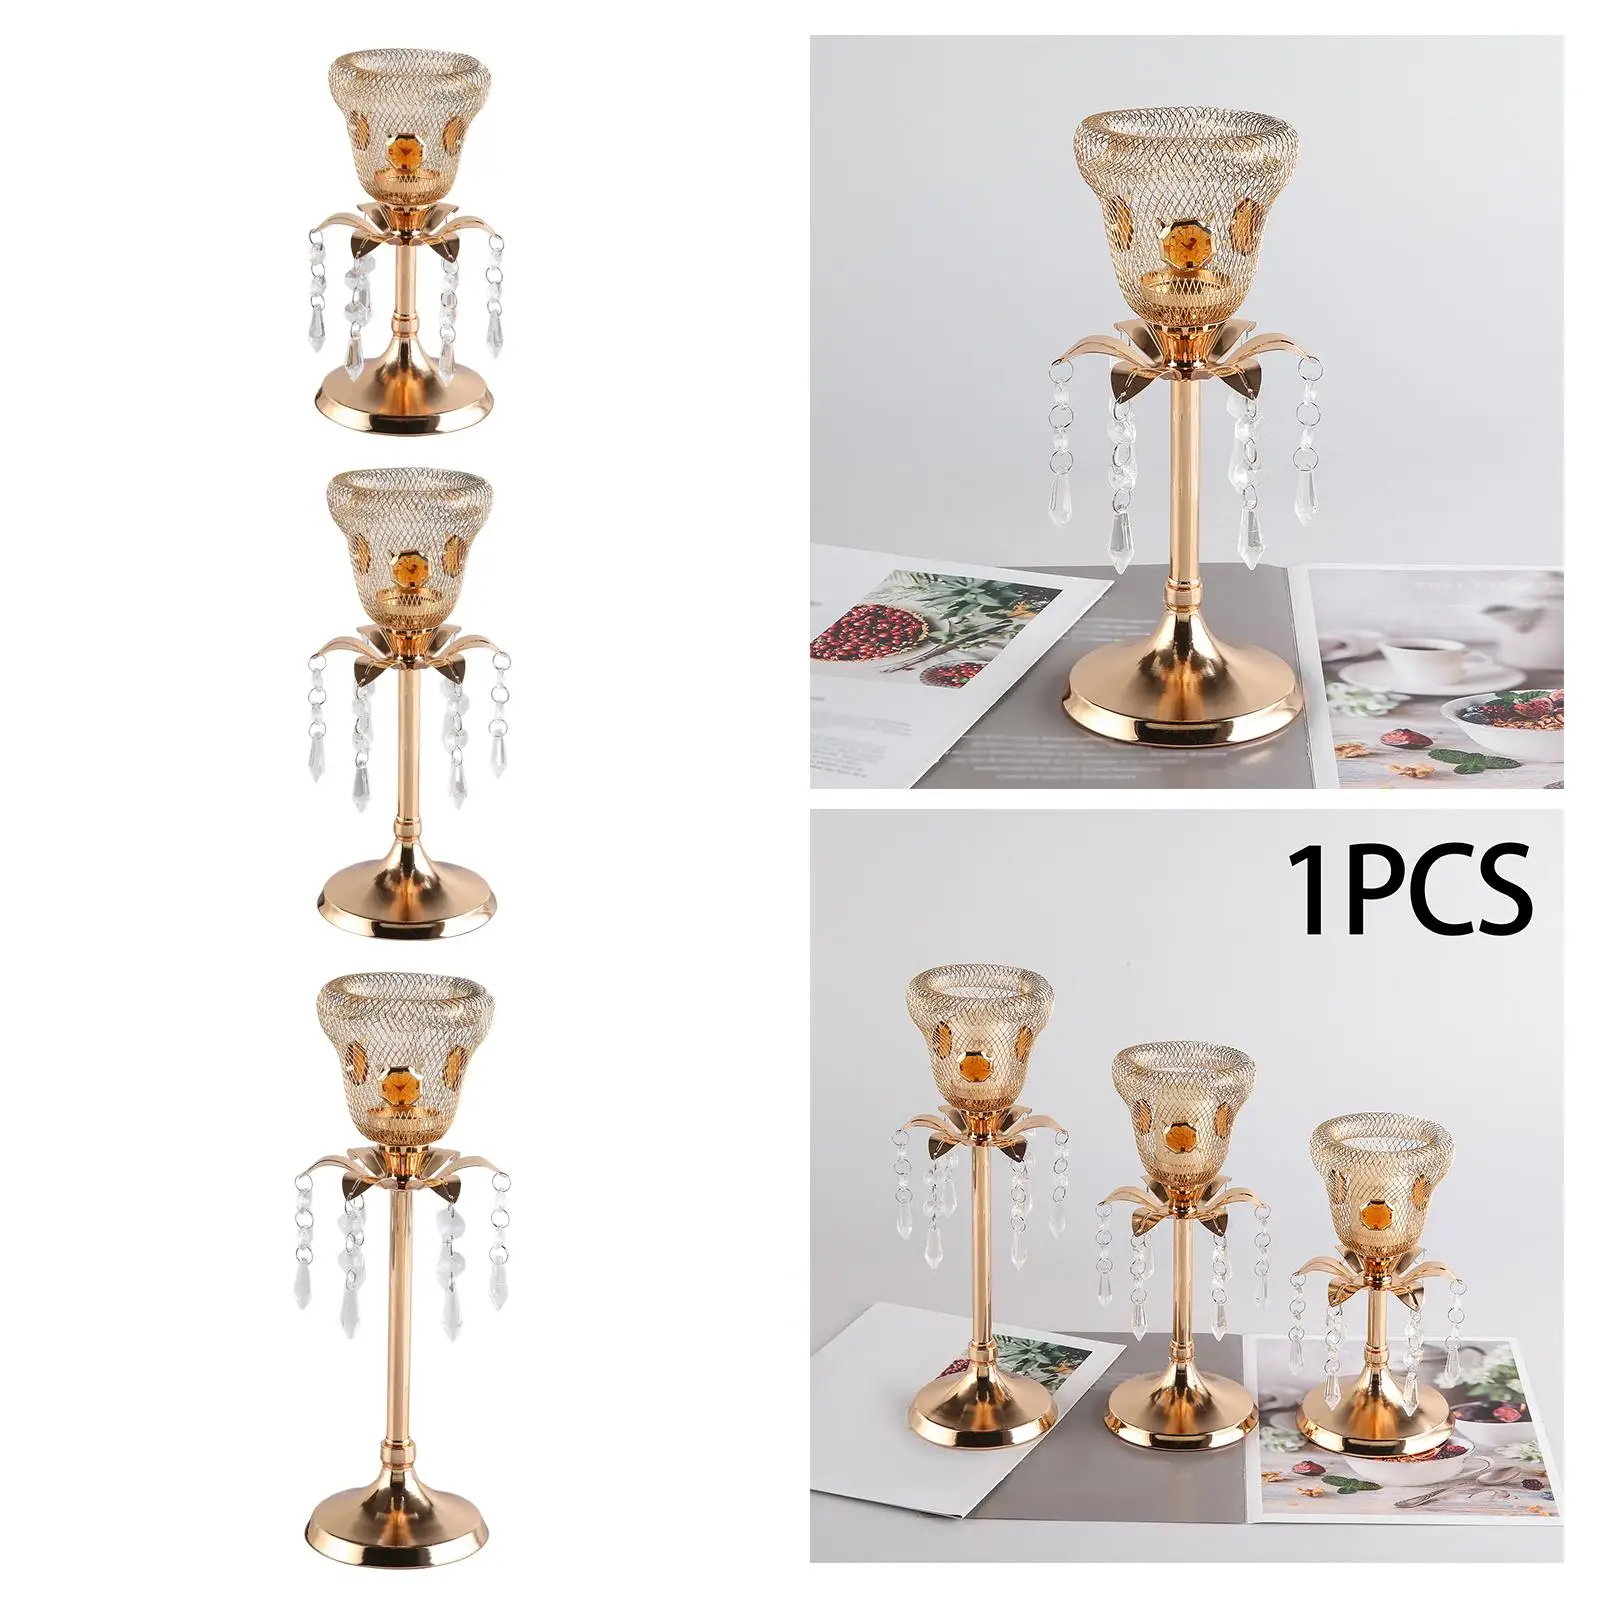 Decorative Tealight Candle Holder for Wedding, Party, Table Centerpieces Decoration